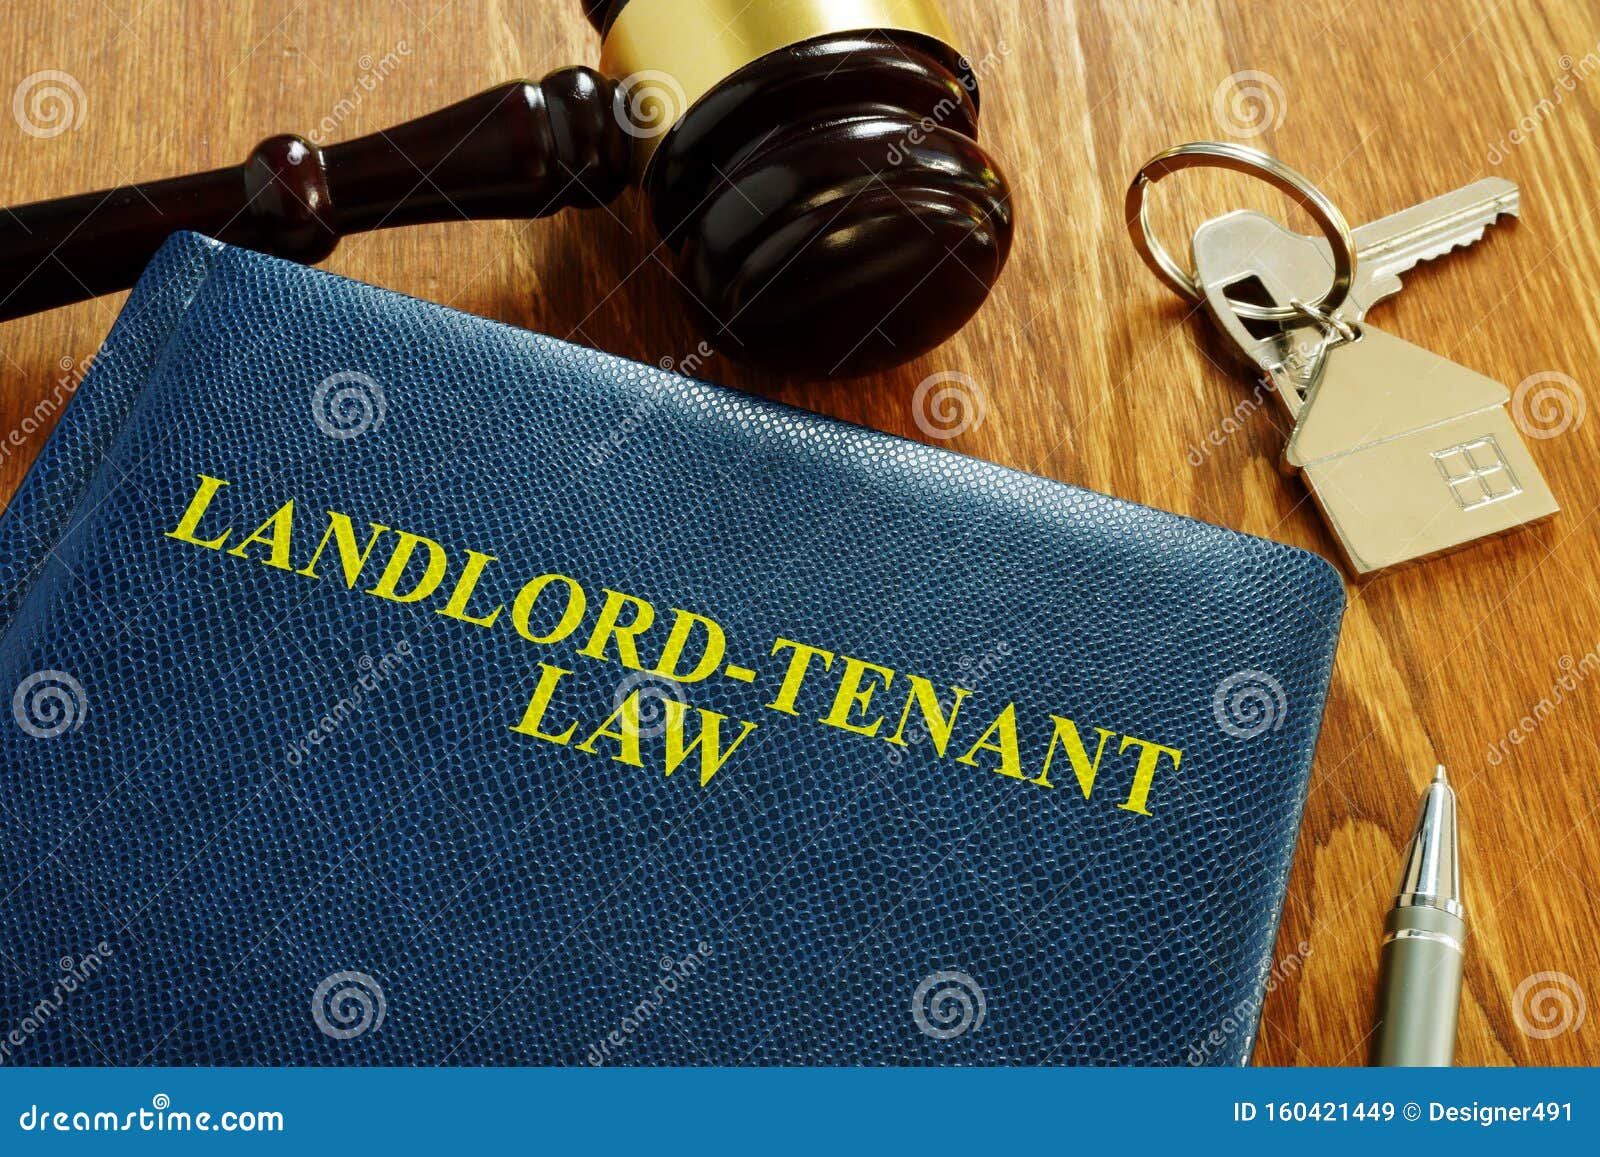 landlord tenant law book and key